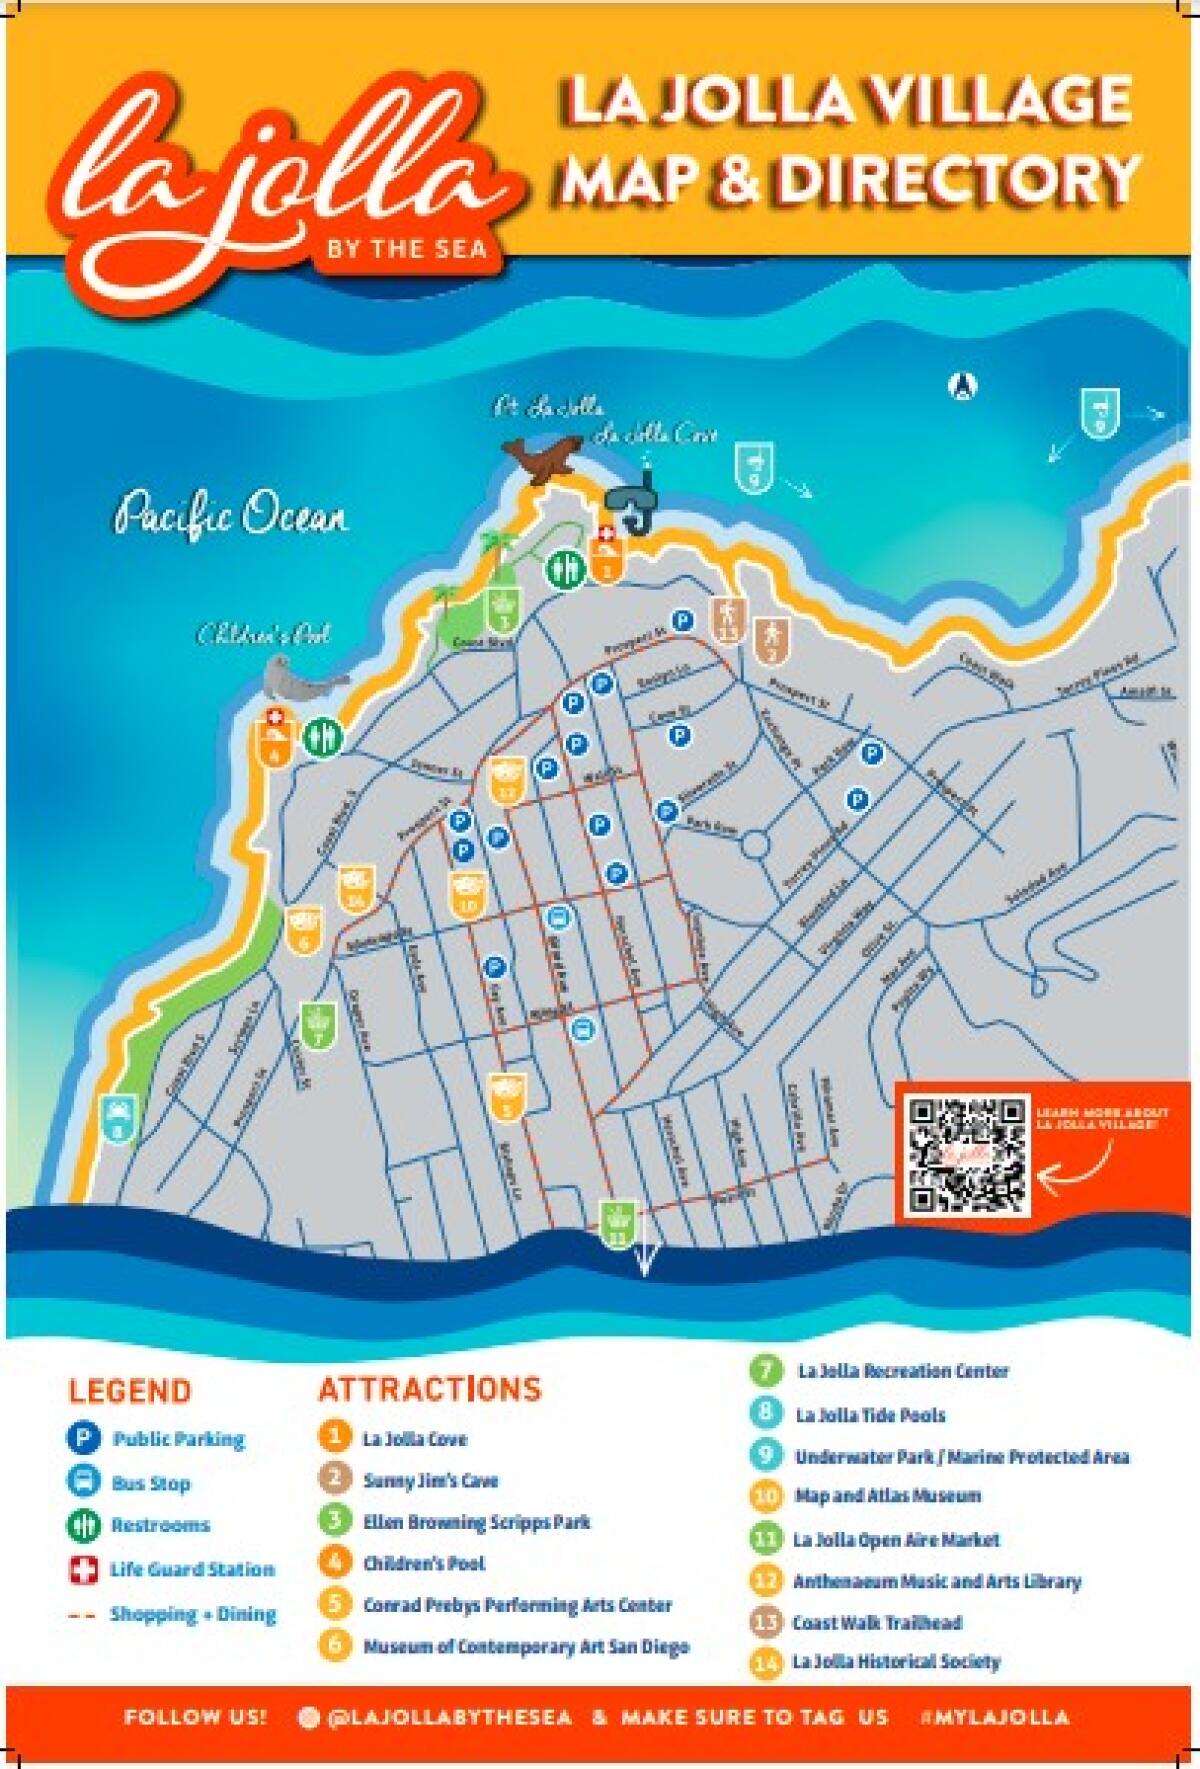 A La Jolla Village Merchants Association map shows local attractions, parking lots and "shopping and dining district." 